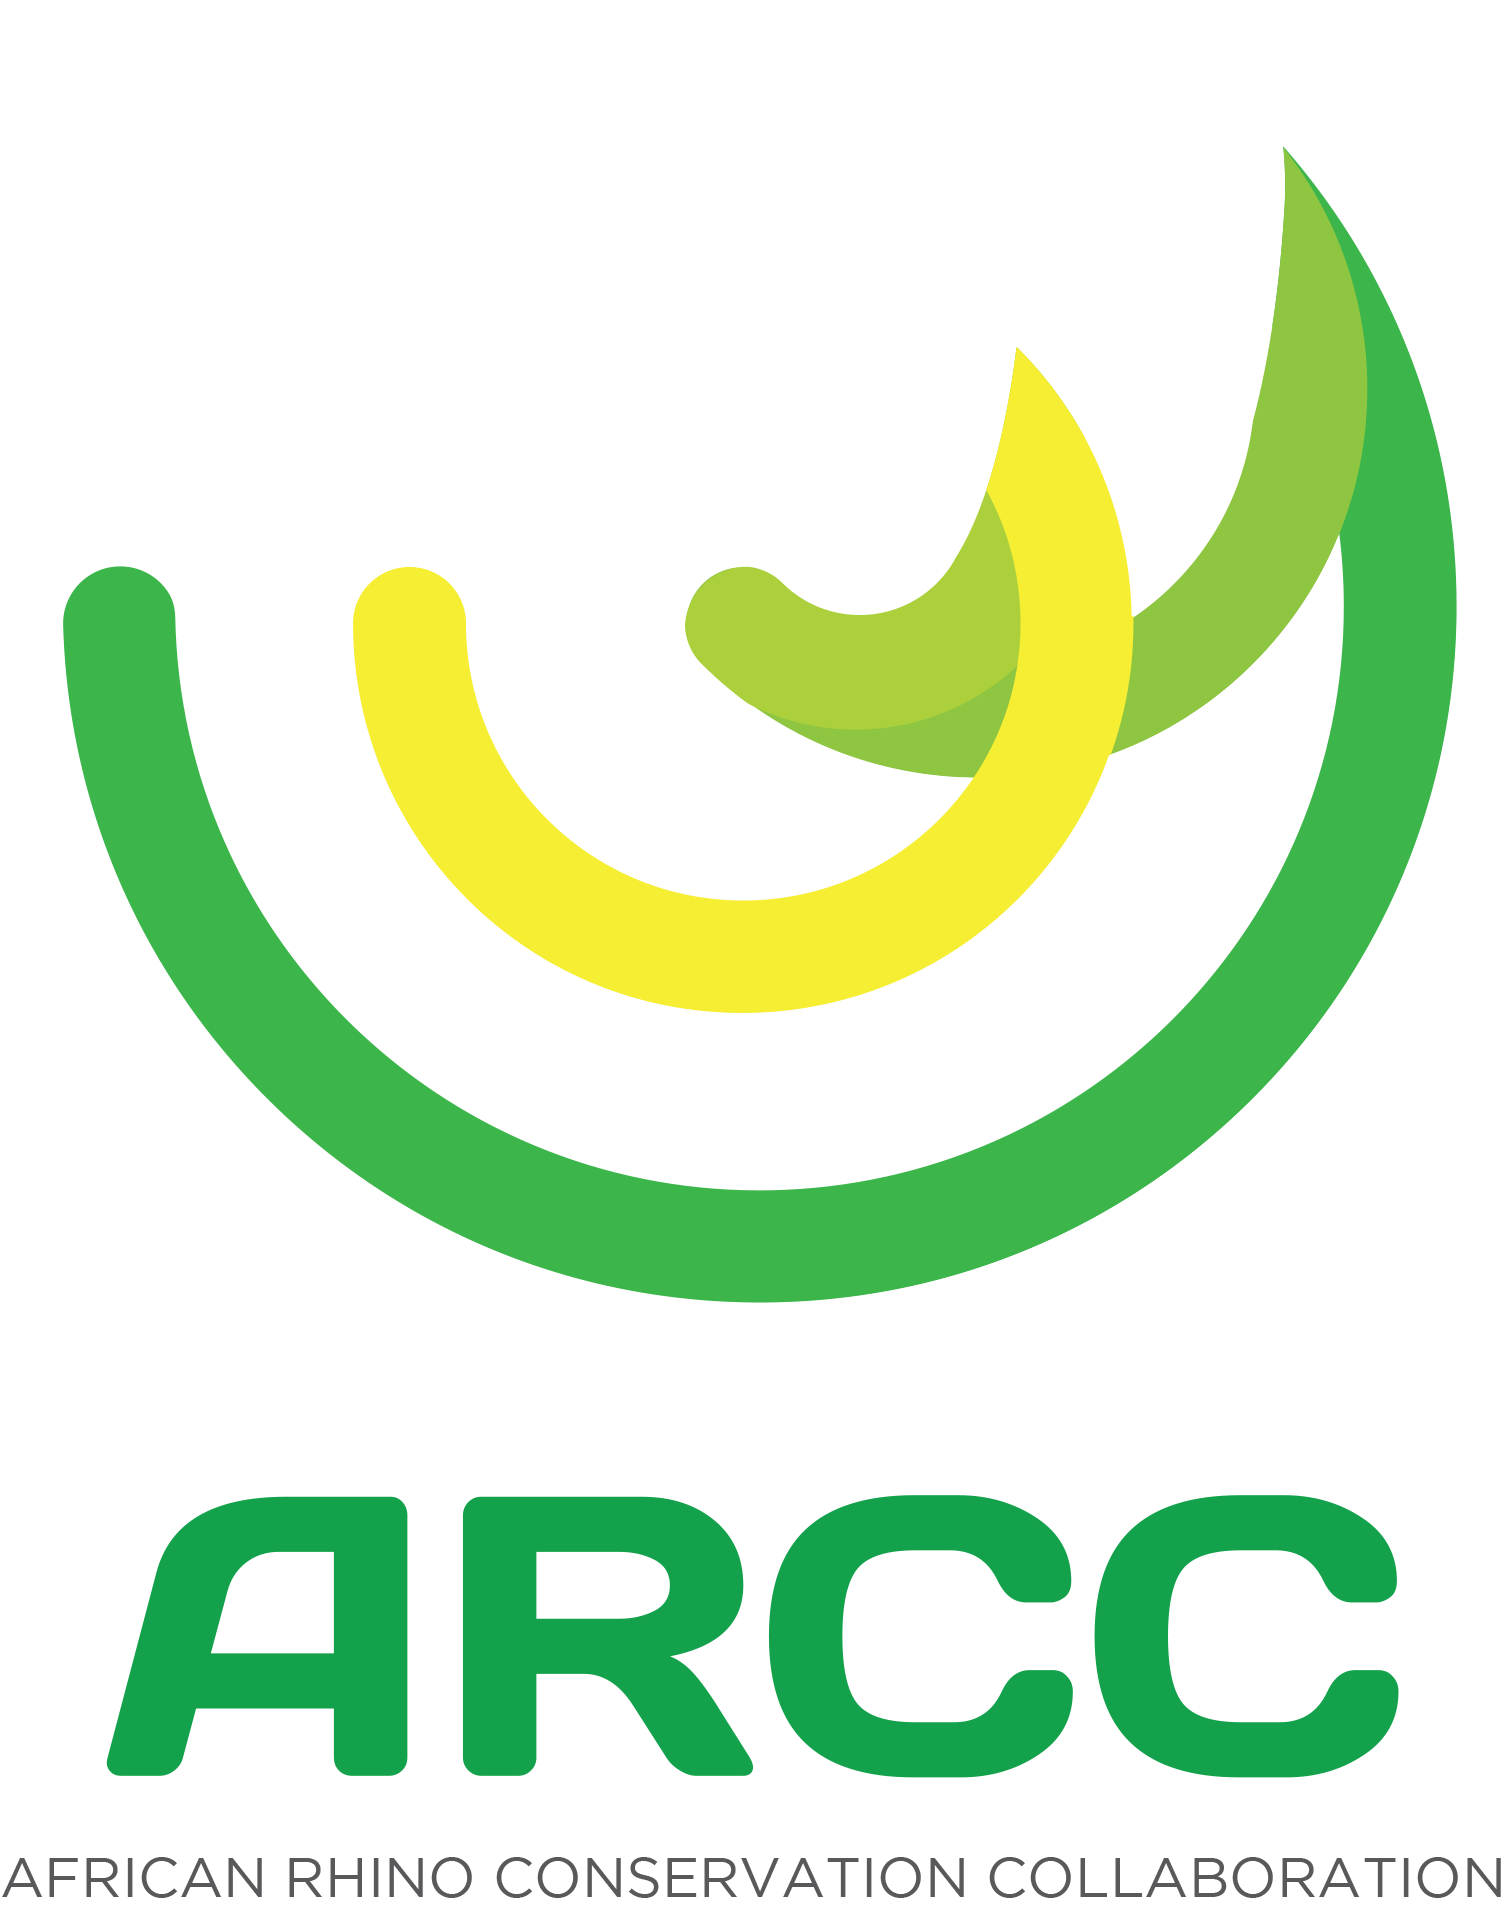 African Rhino Conservation Collaboration